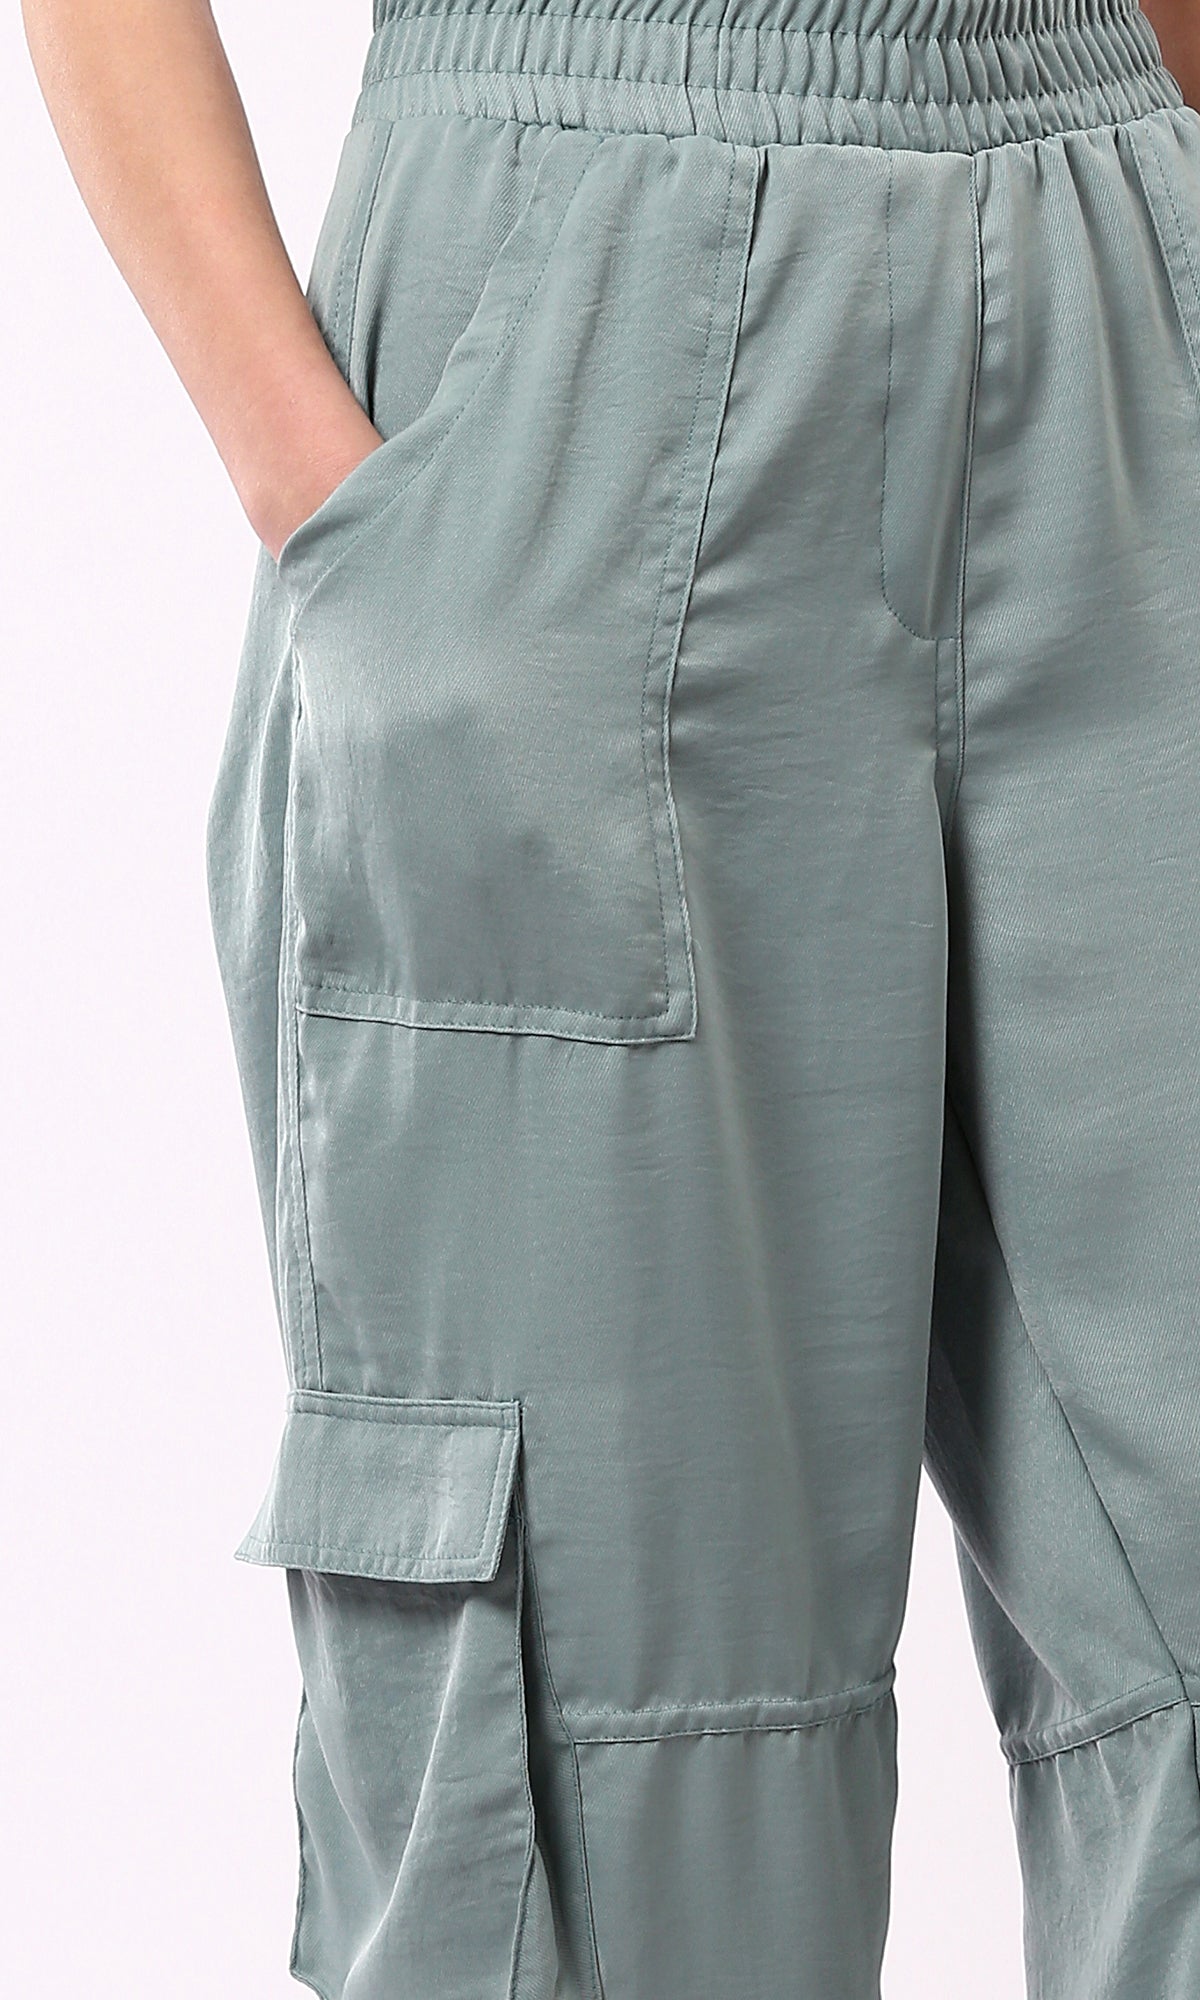 O179139 Casual Mint Jogger Pants With Multiple Pockets